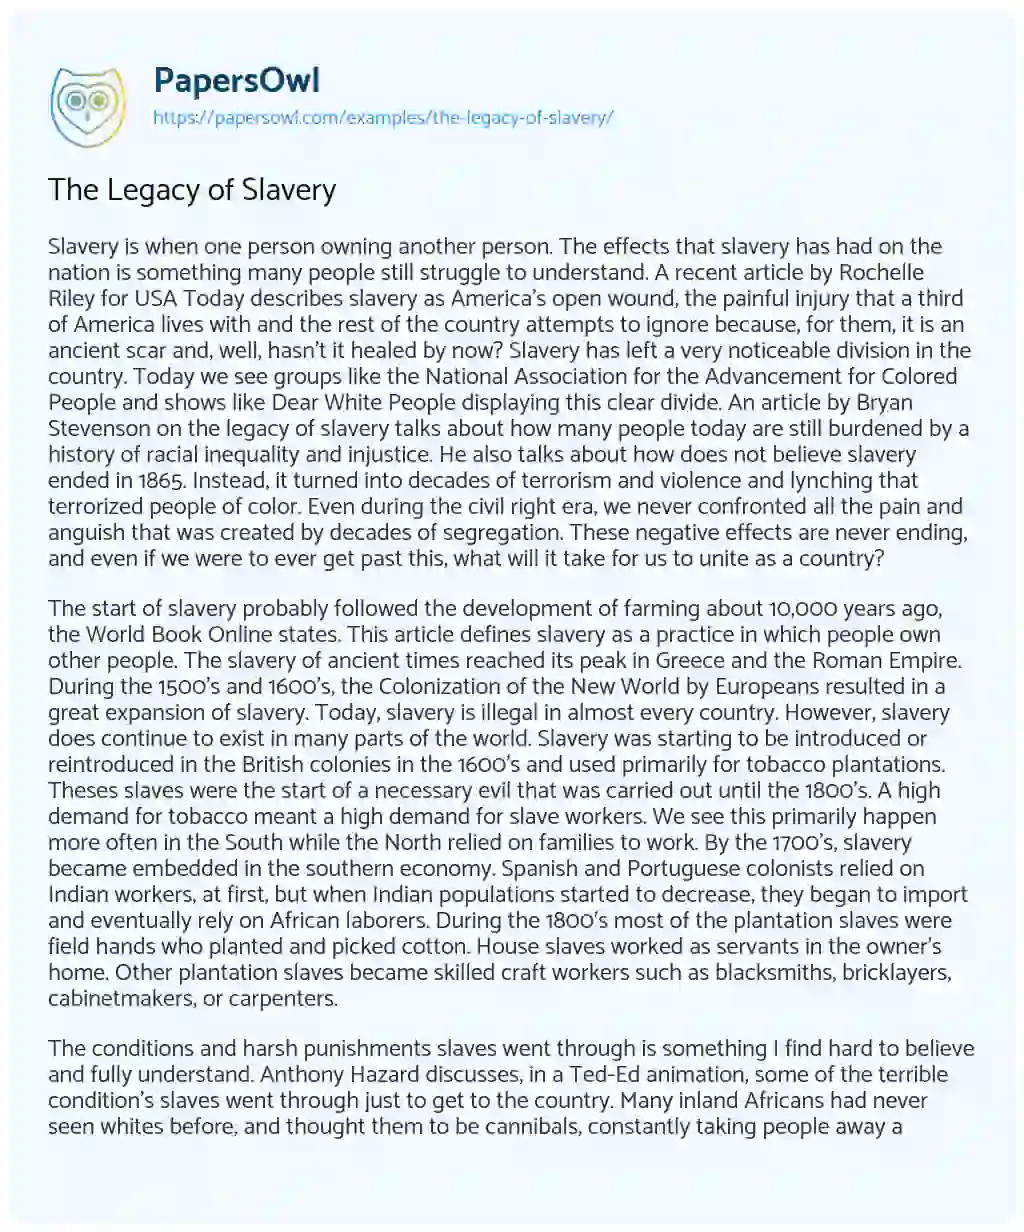 Essay on The Legacy of Slavery